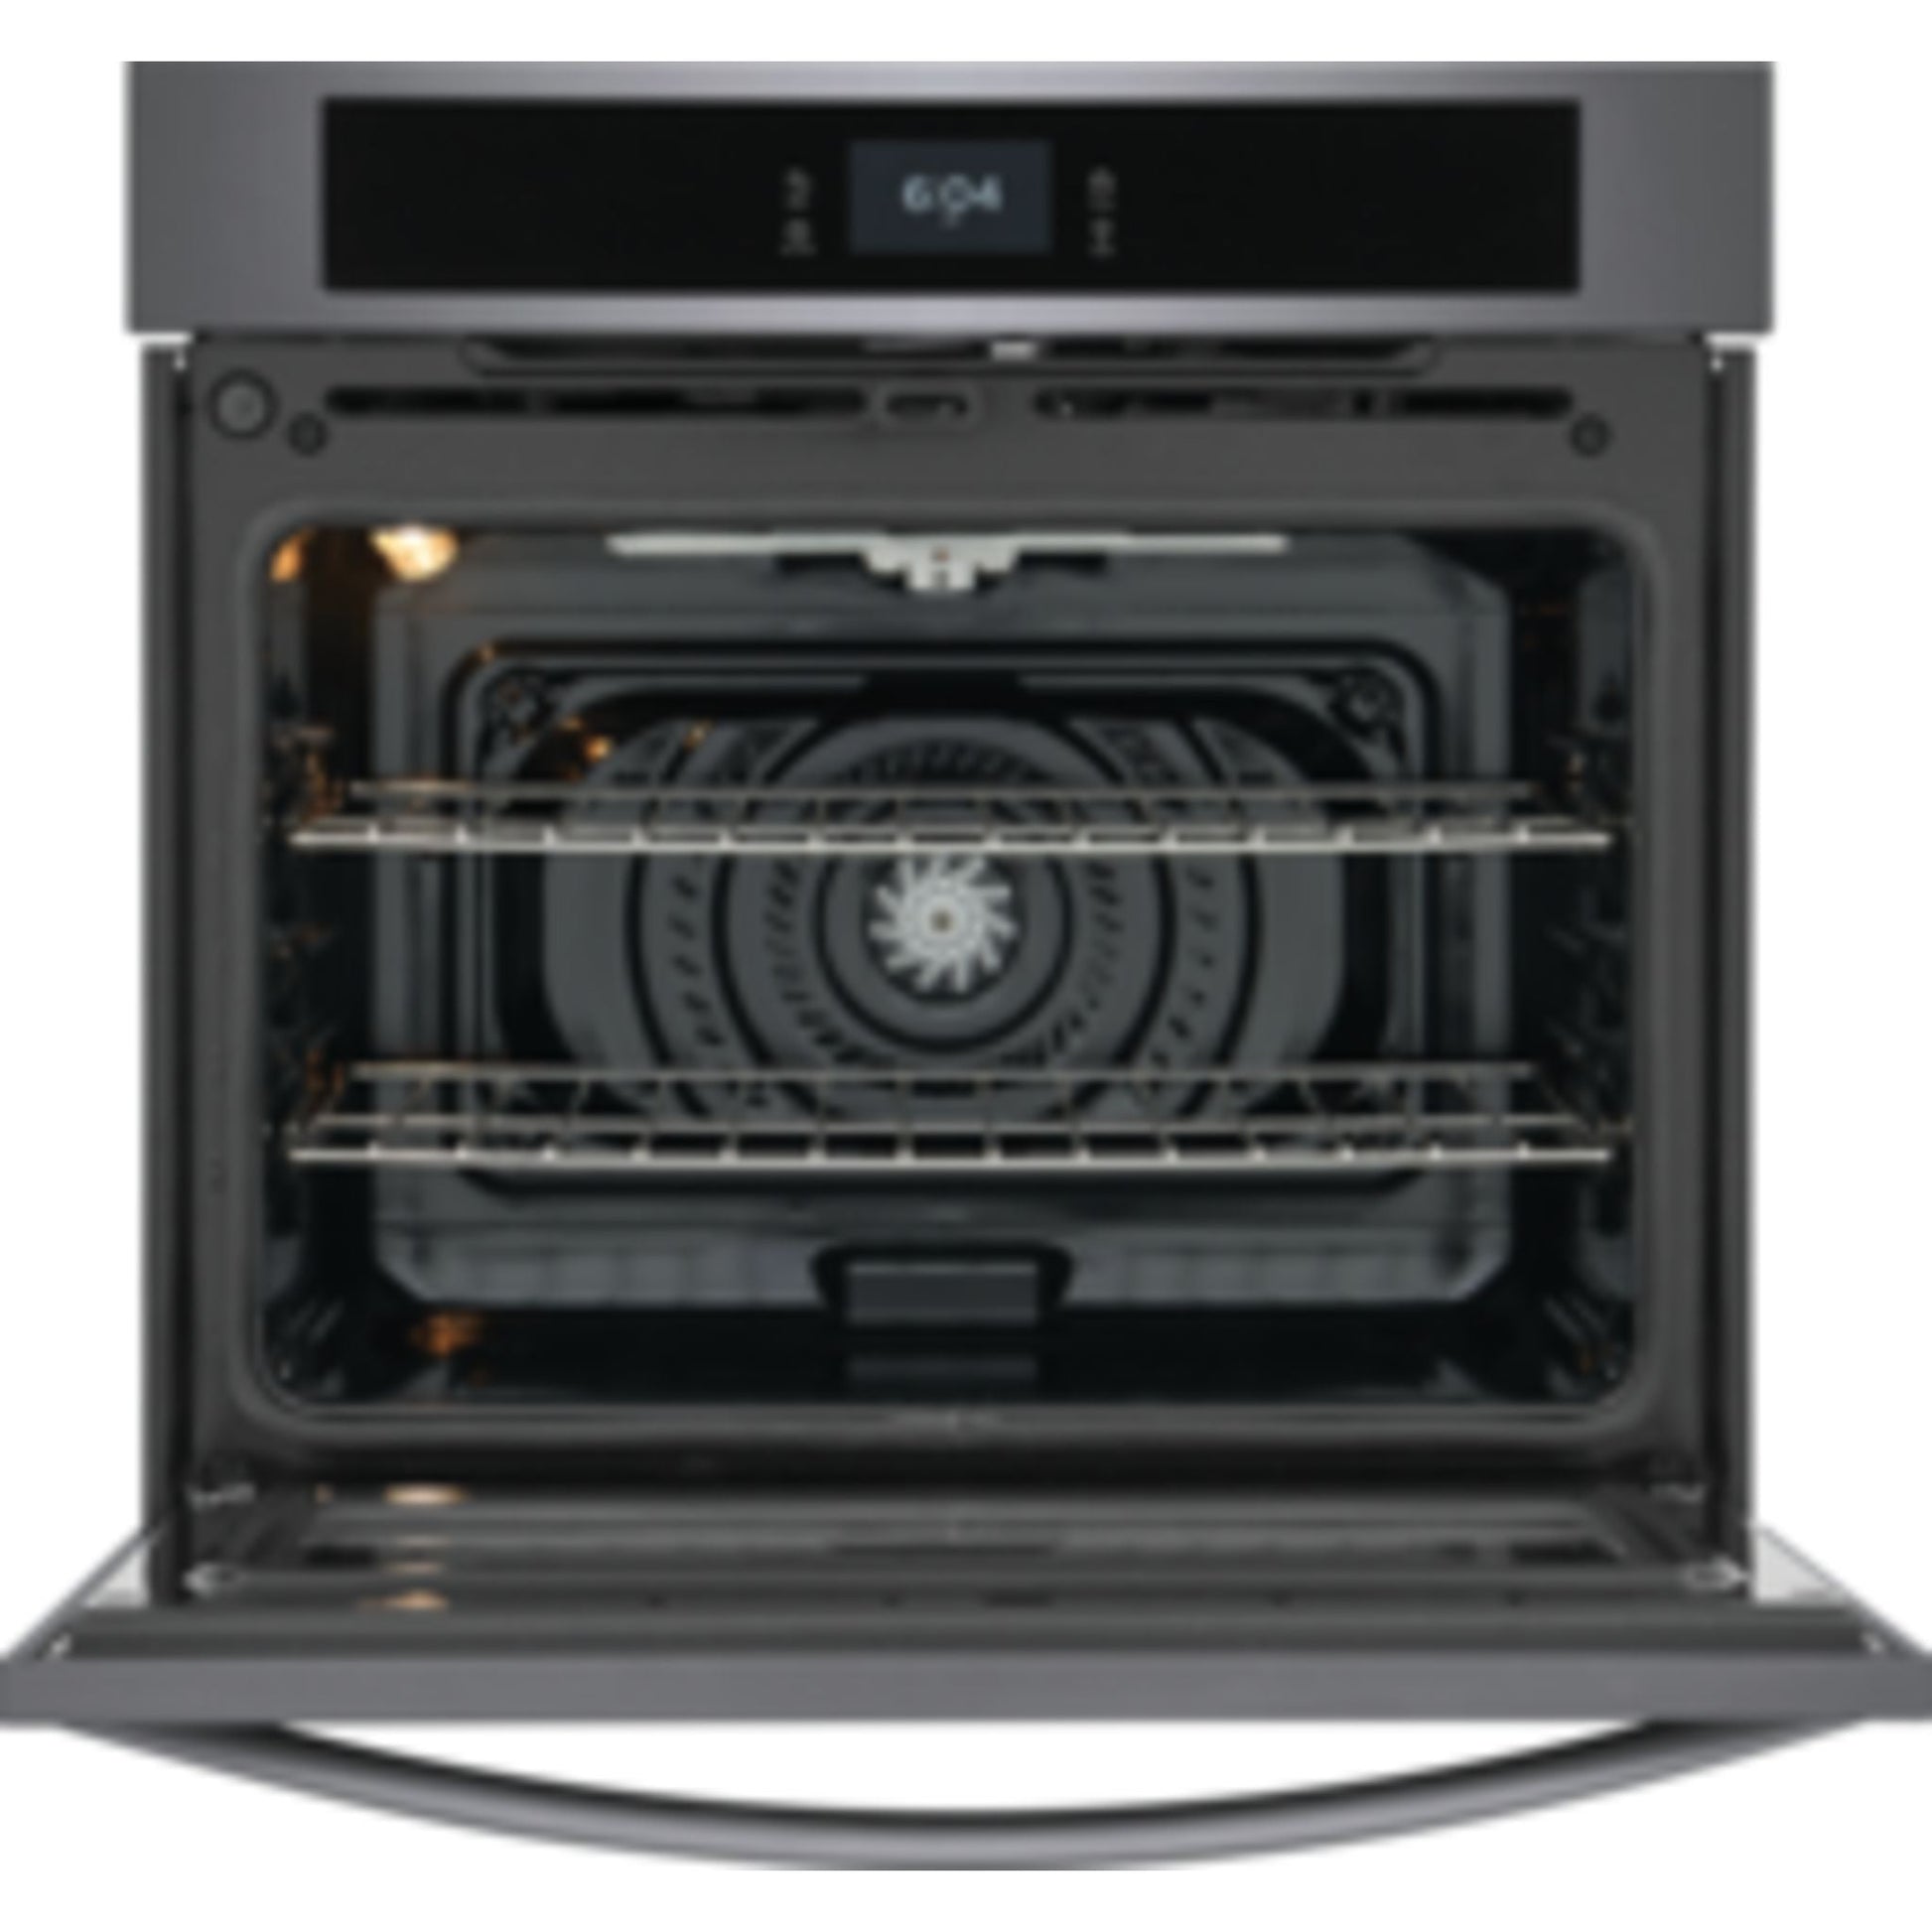 Frigidaire 30" Convection Wall Oven (FCWS3027AD) - Black Stainless